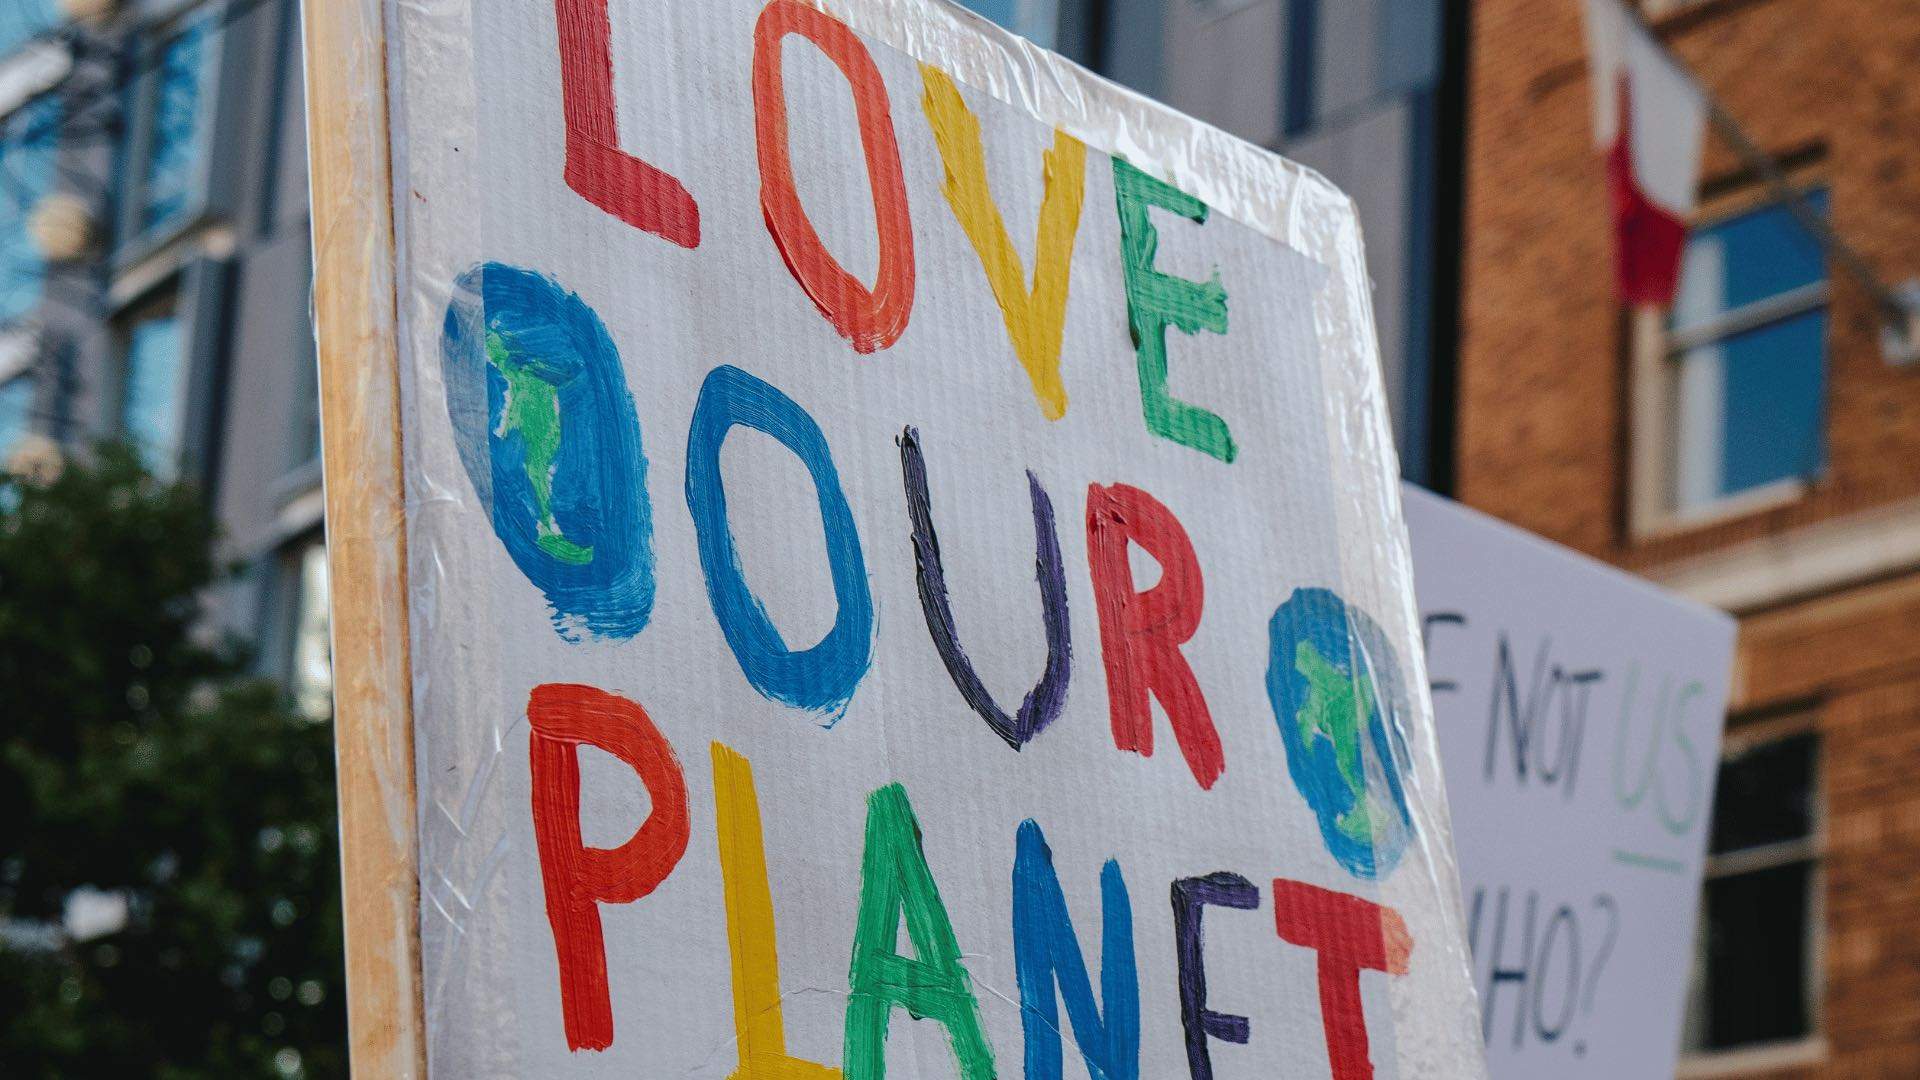 A person holding up a protest sign that reads "Love out planet".